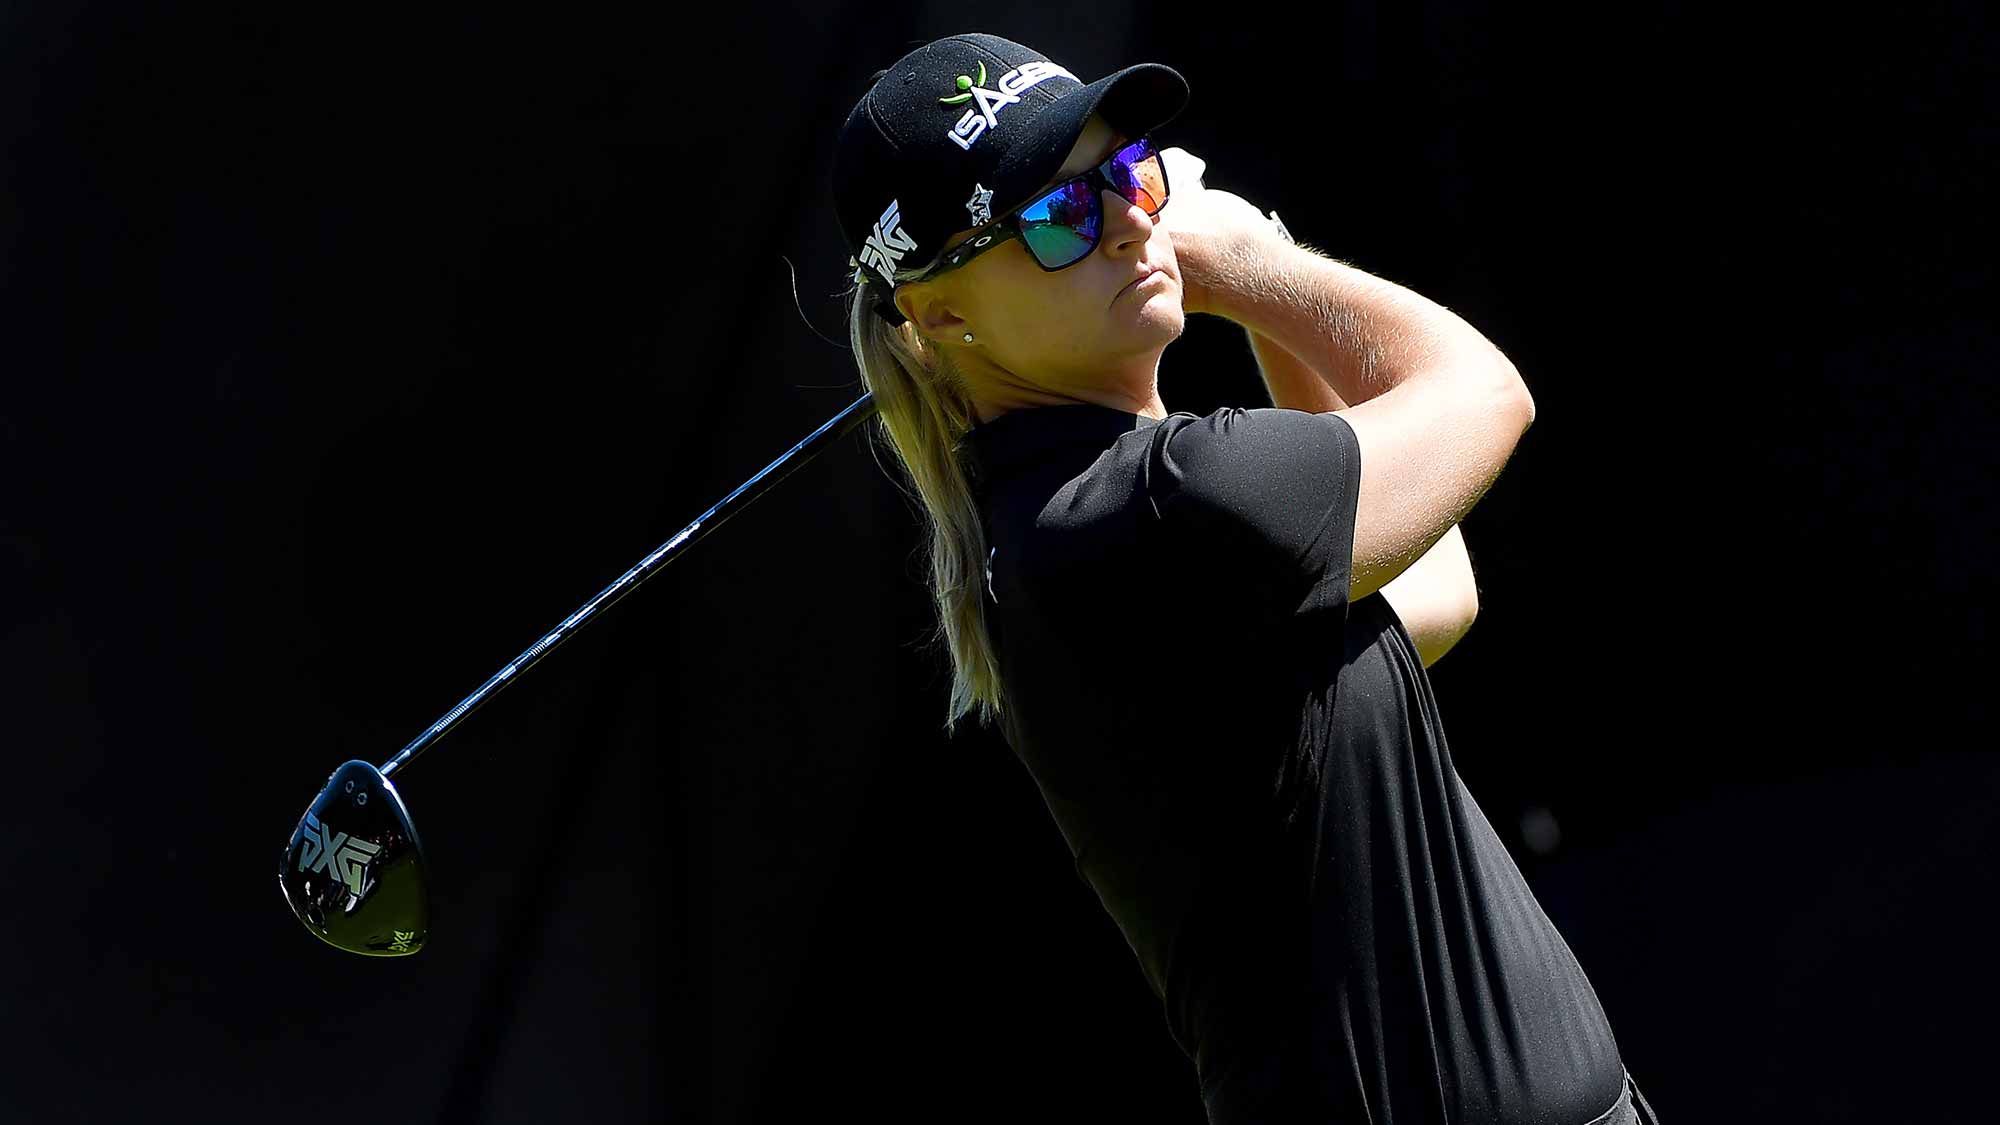 Anna Nordqvist of Sweden tees off the 1st hole during the Final Round of the LPGA KIA CLASSIC at the Park Hyatt Aviara golf course on March 25, 2018 in Carlsbad, California